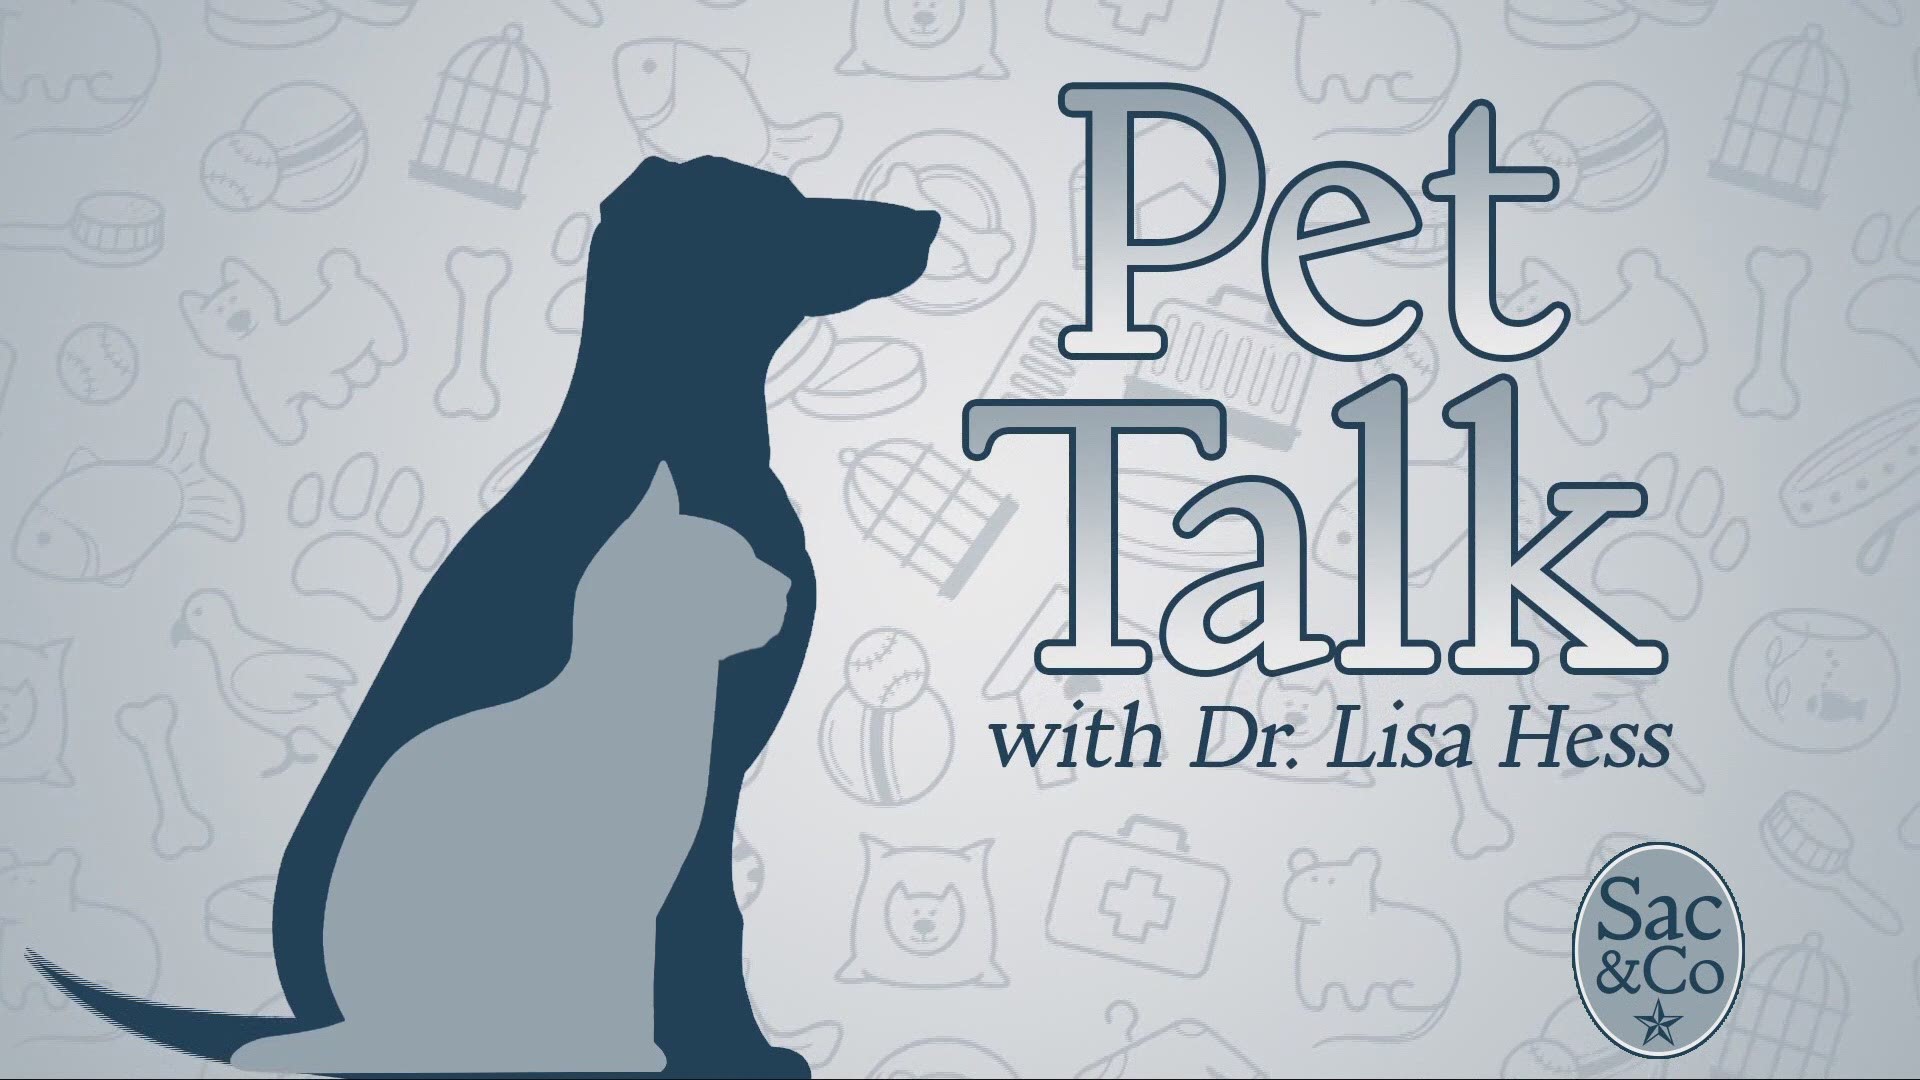 The holidays are a wonderful time of year! But they can also be dangerous for our four-legged family members. Keep your pets safe this holiday season. Dr. Lisa Hess tells us how!